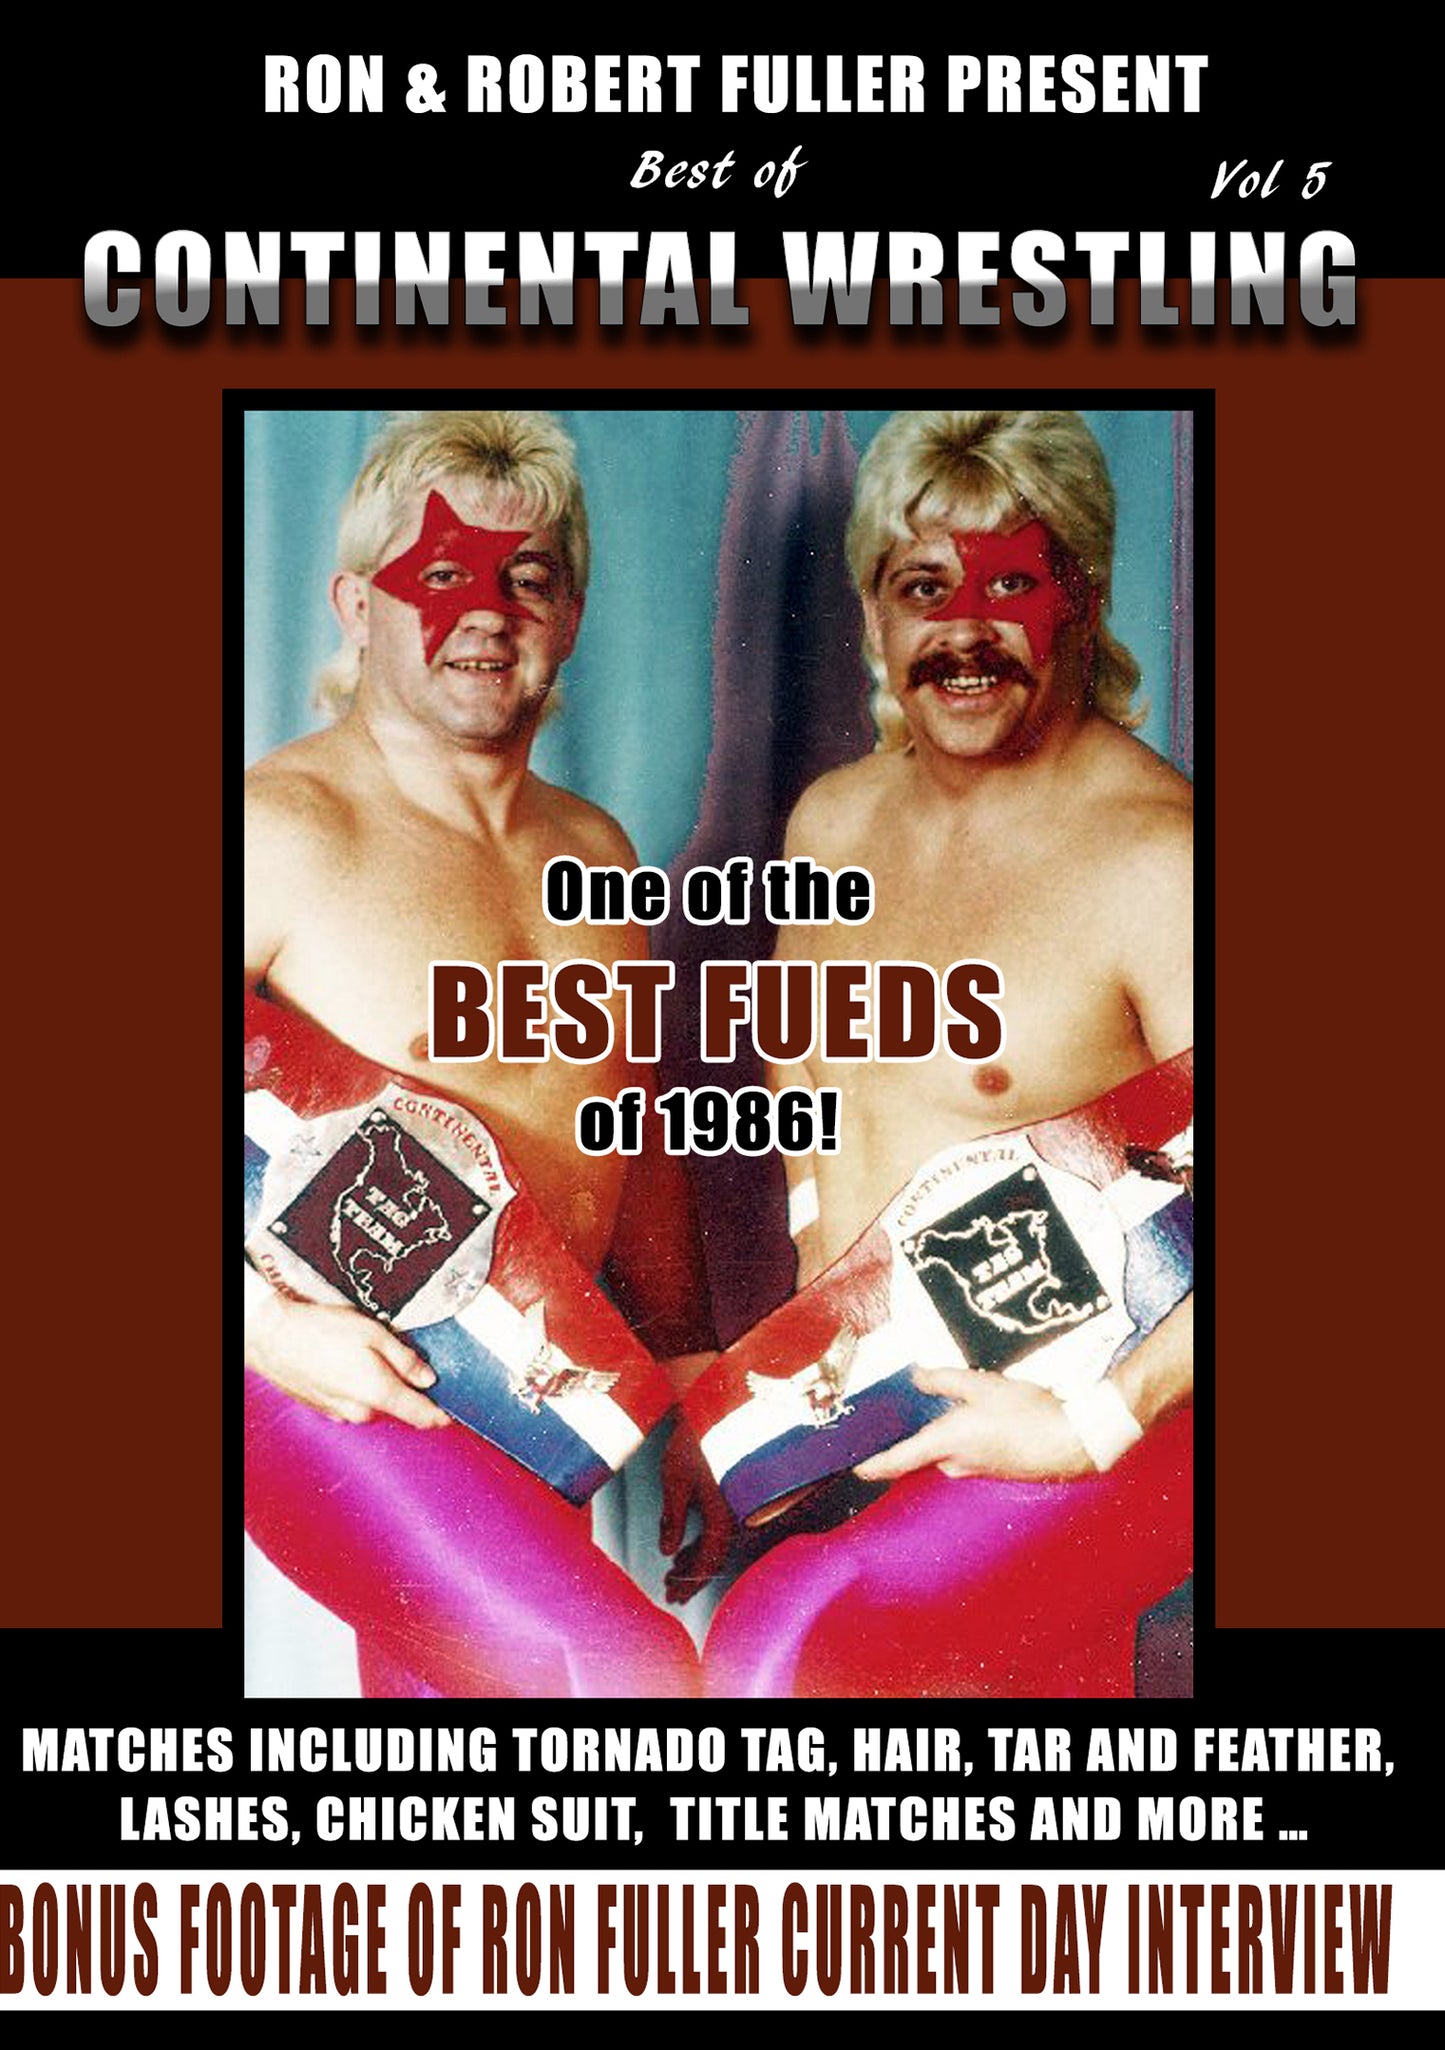 Best of Continental Wrestling: Vol. 5 cover art